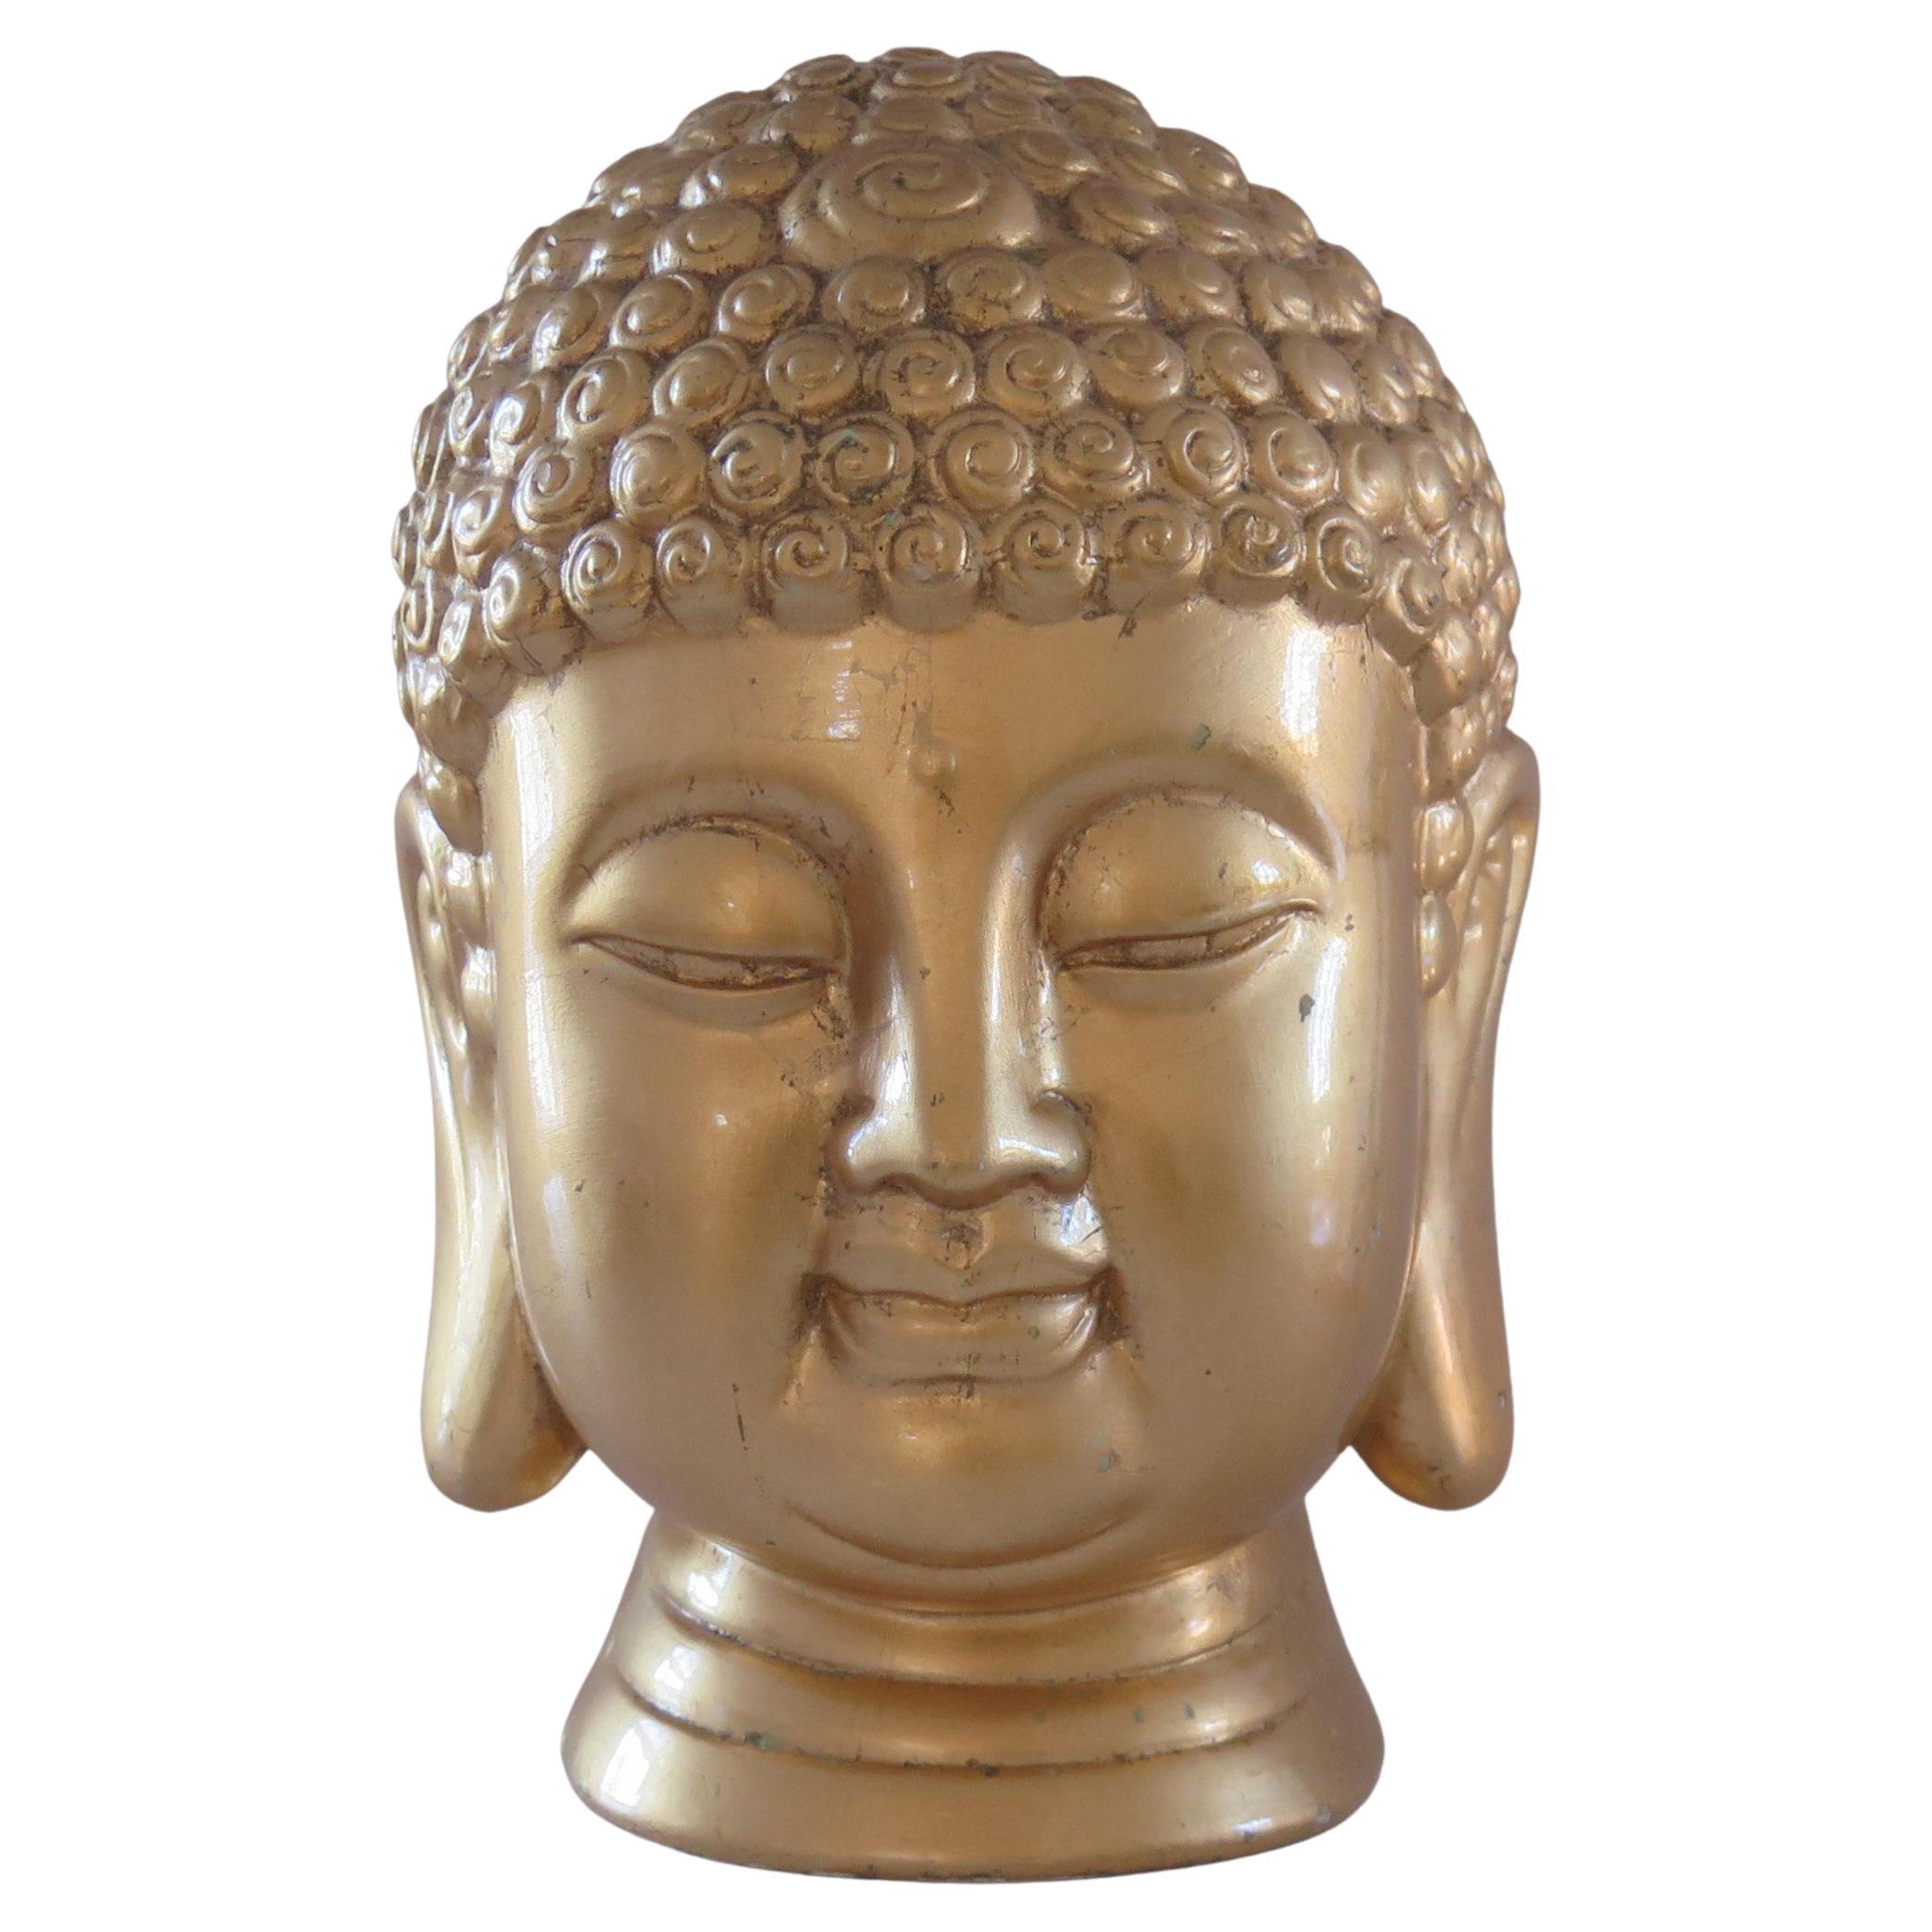 Large Ceramic Buddha Head or Bust with Real Gold Leaf, Asian Origin